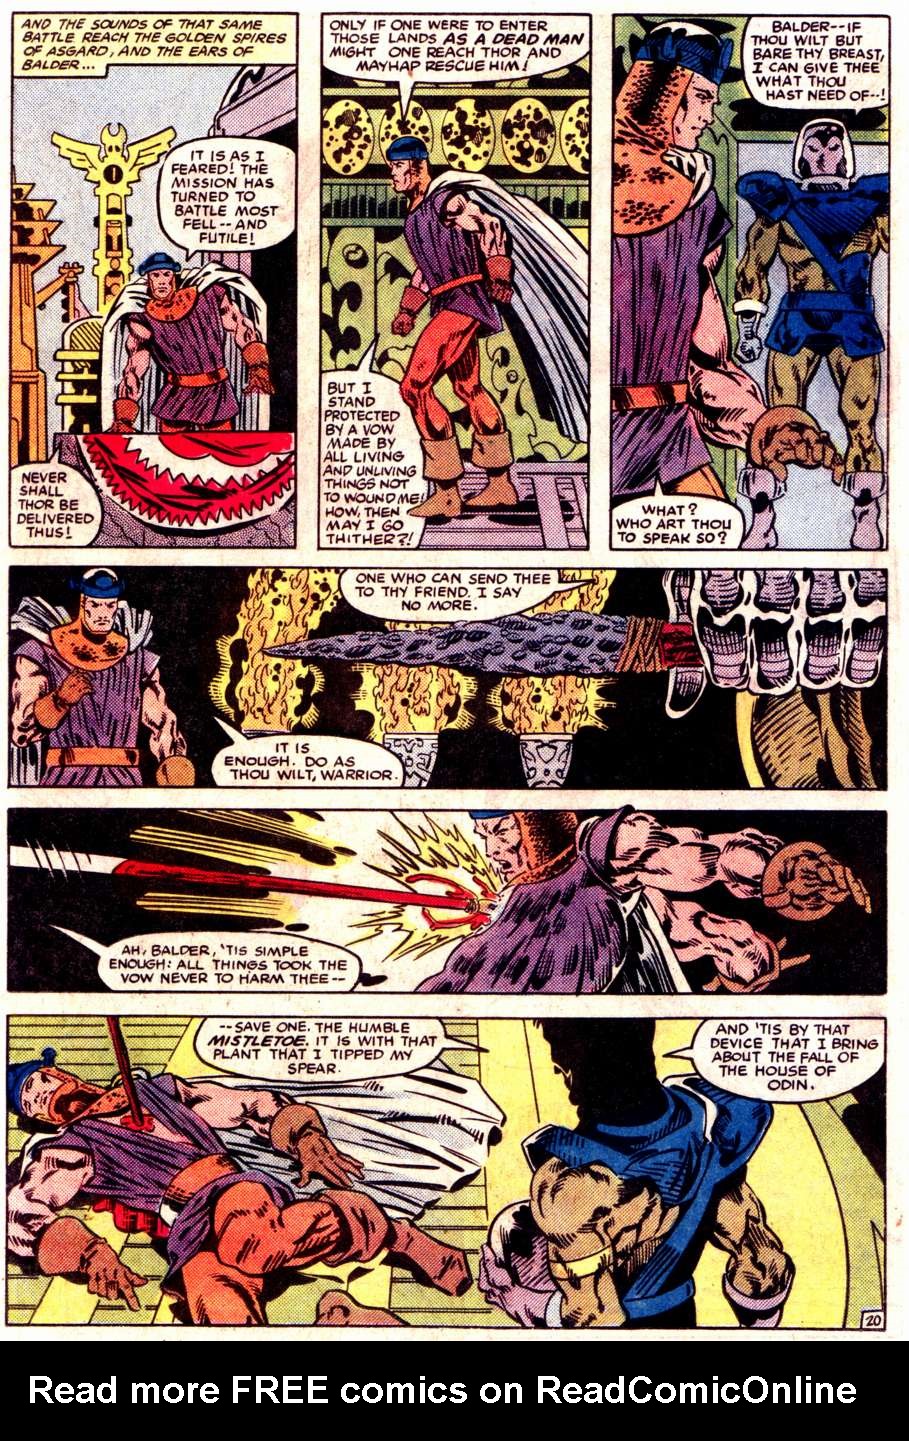 What If? (1977) issue 47 - Loki had found The hammer of Thor - Page 21